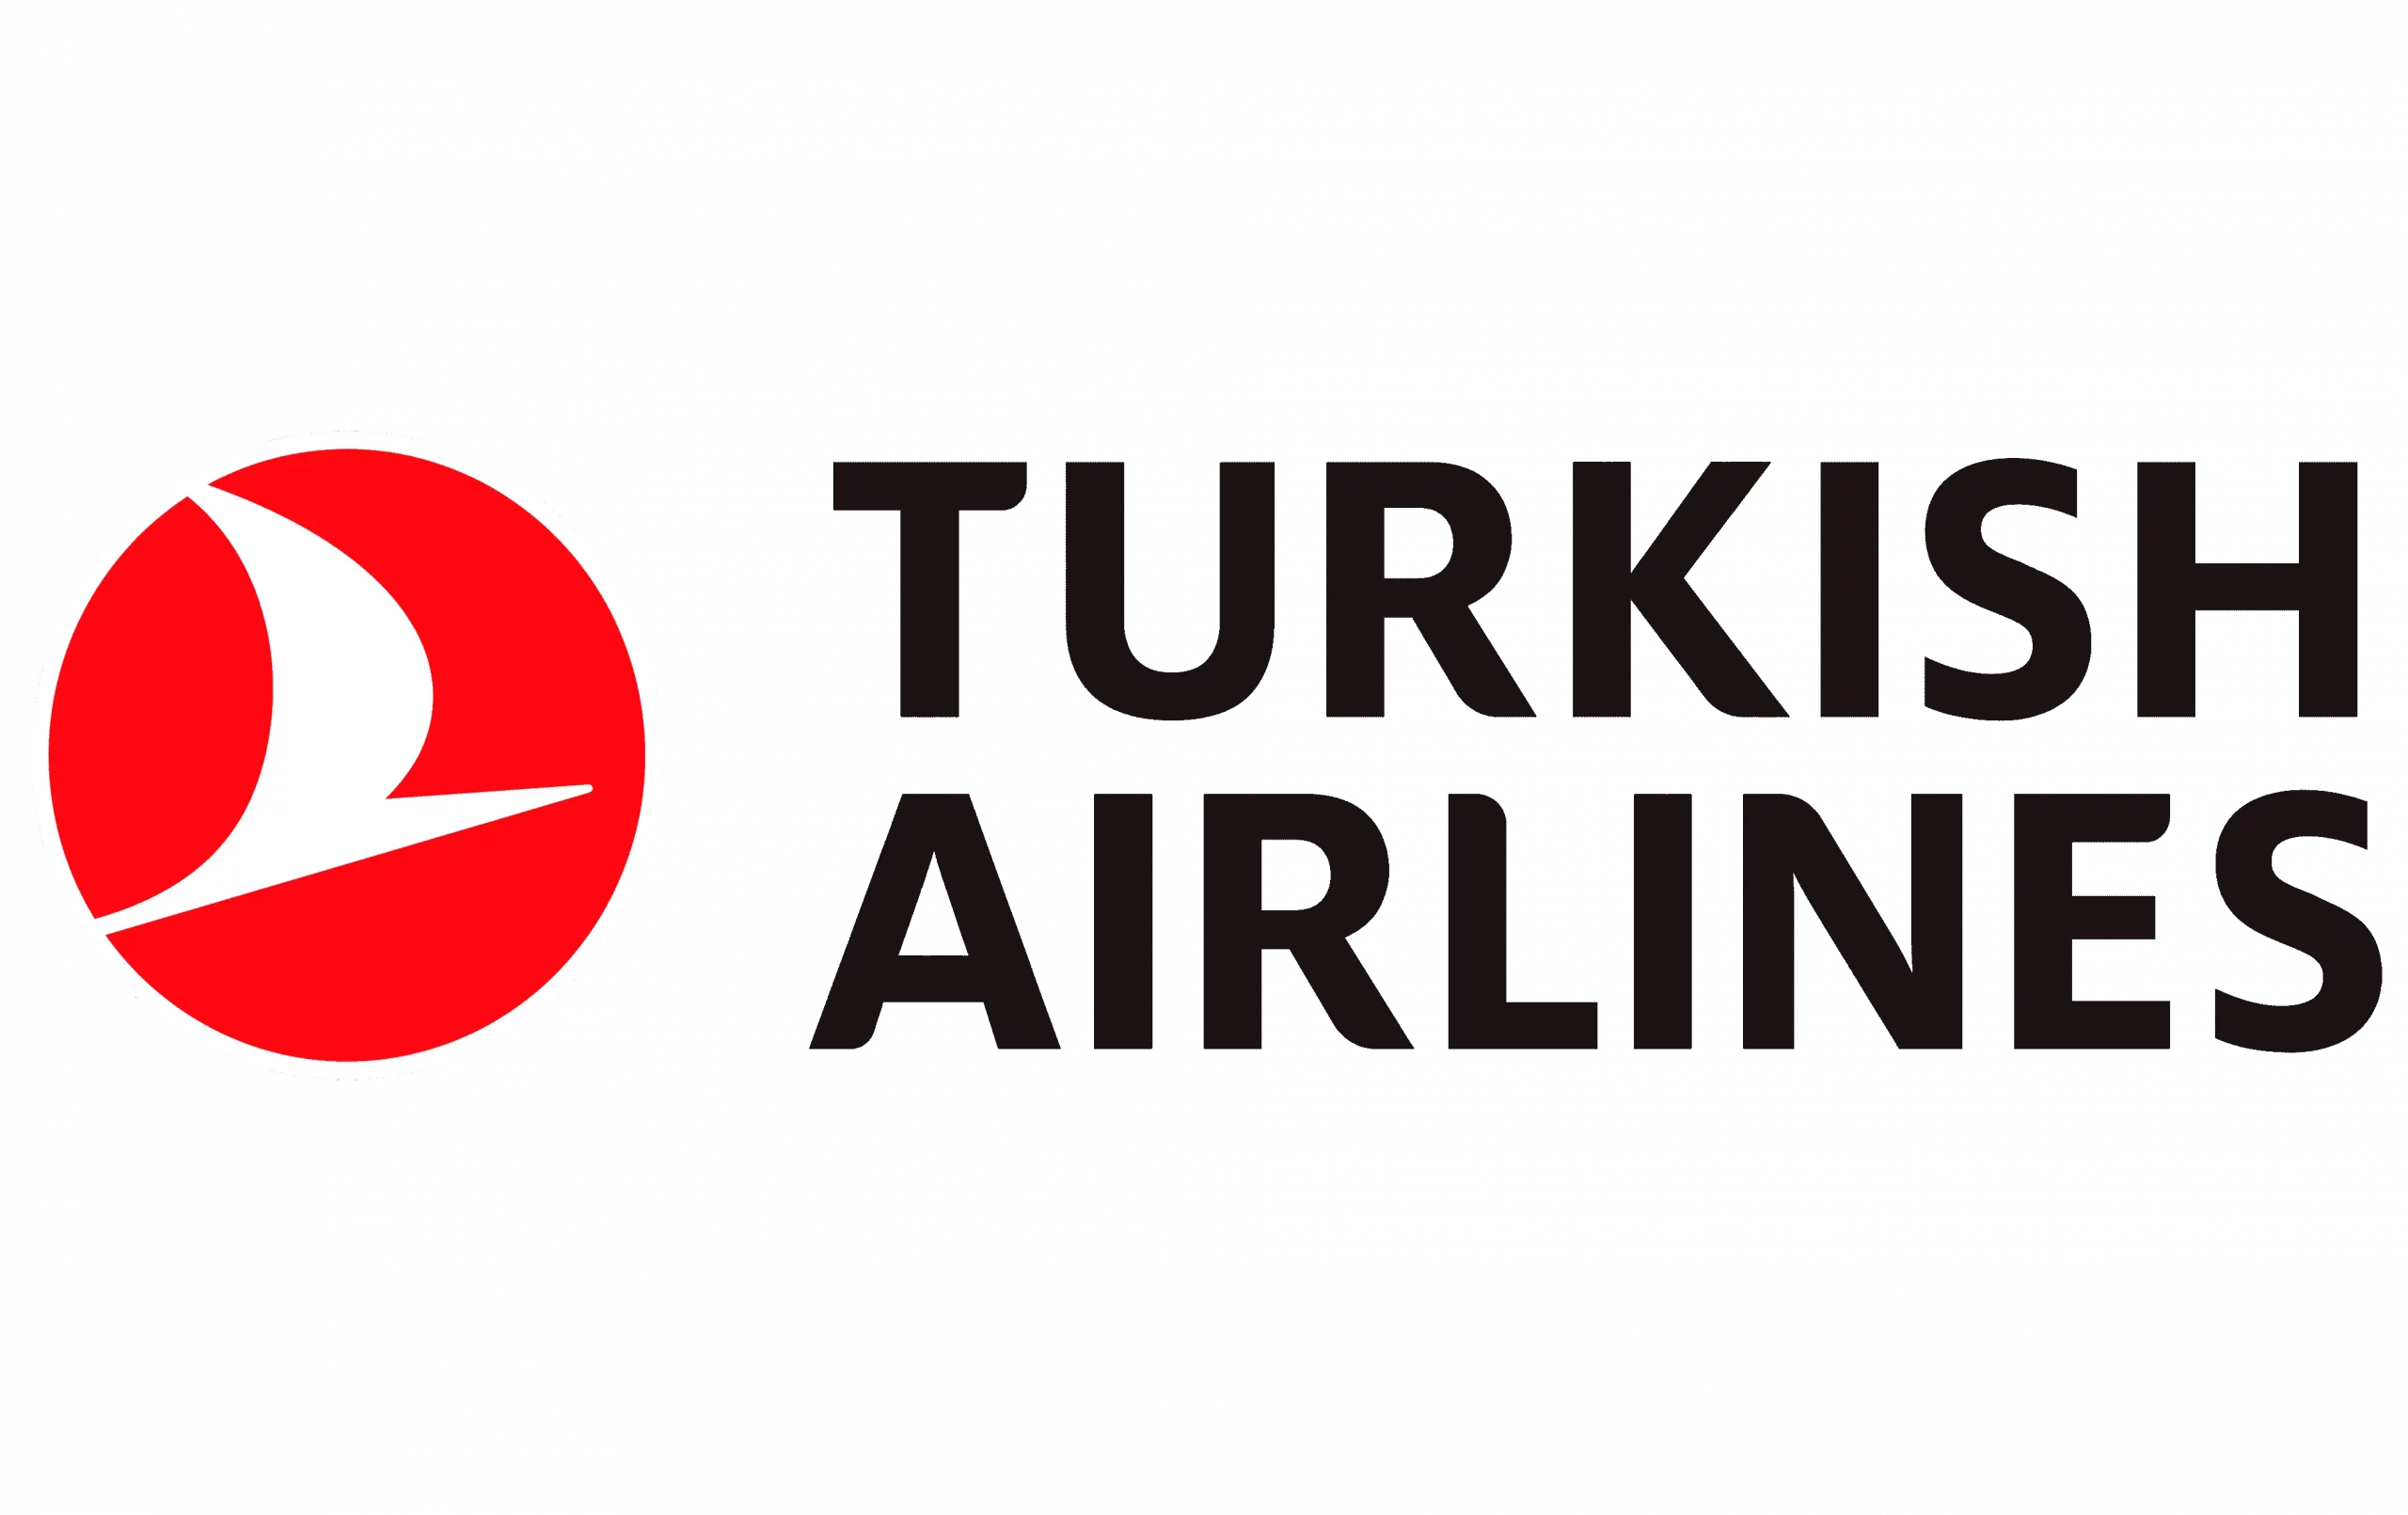 Turkish Airlines customs clearance at uk